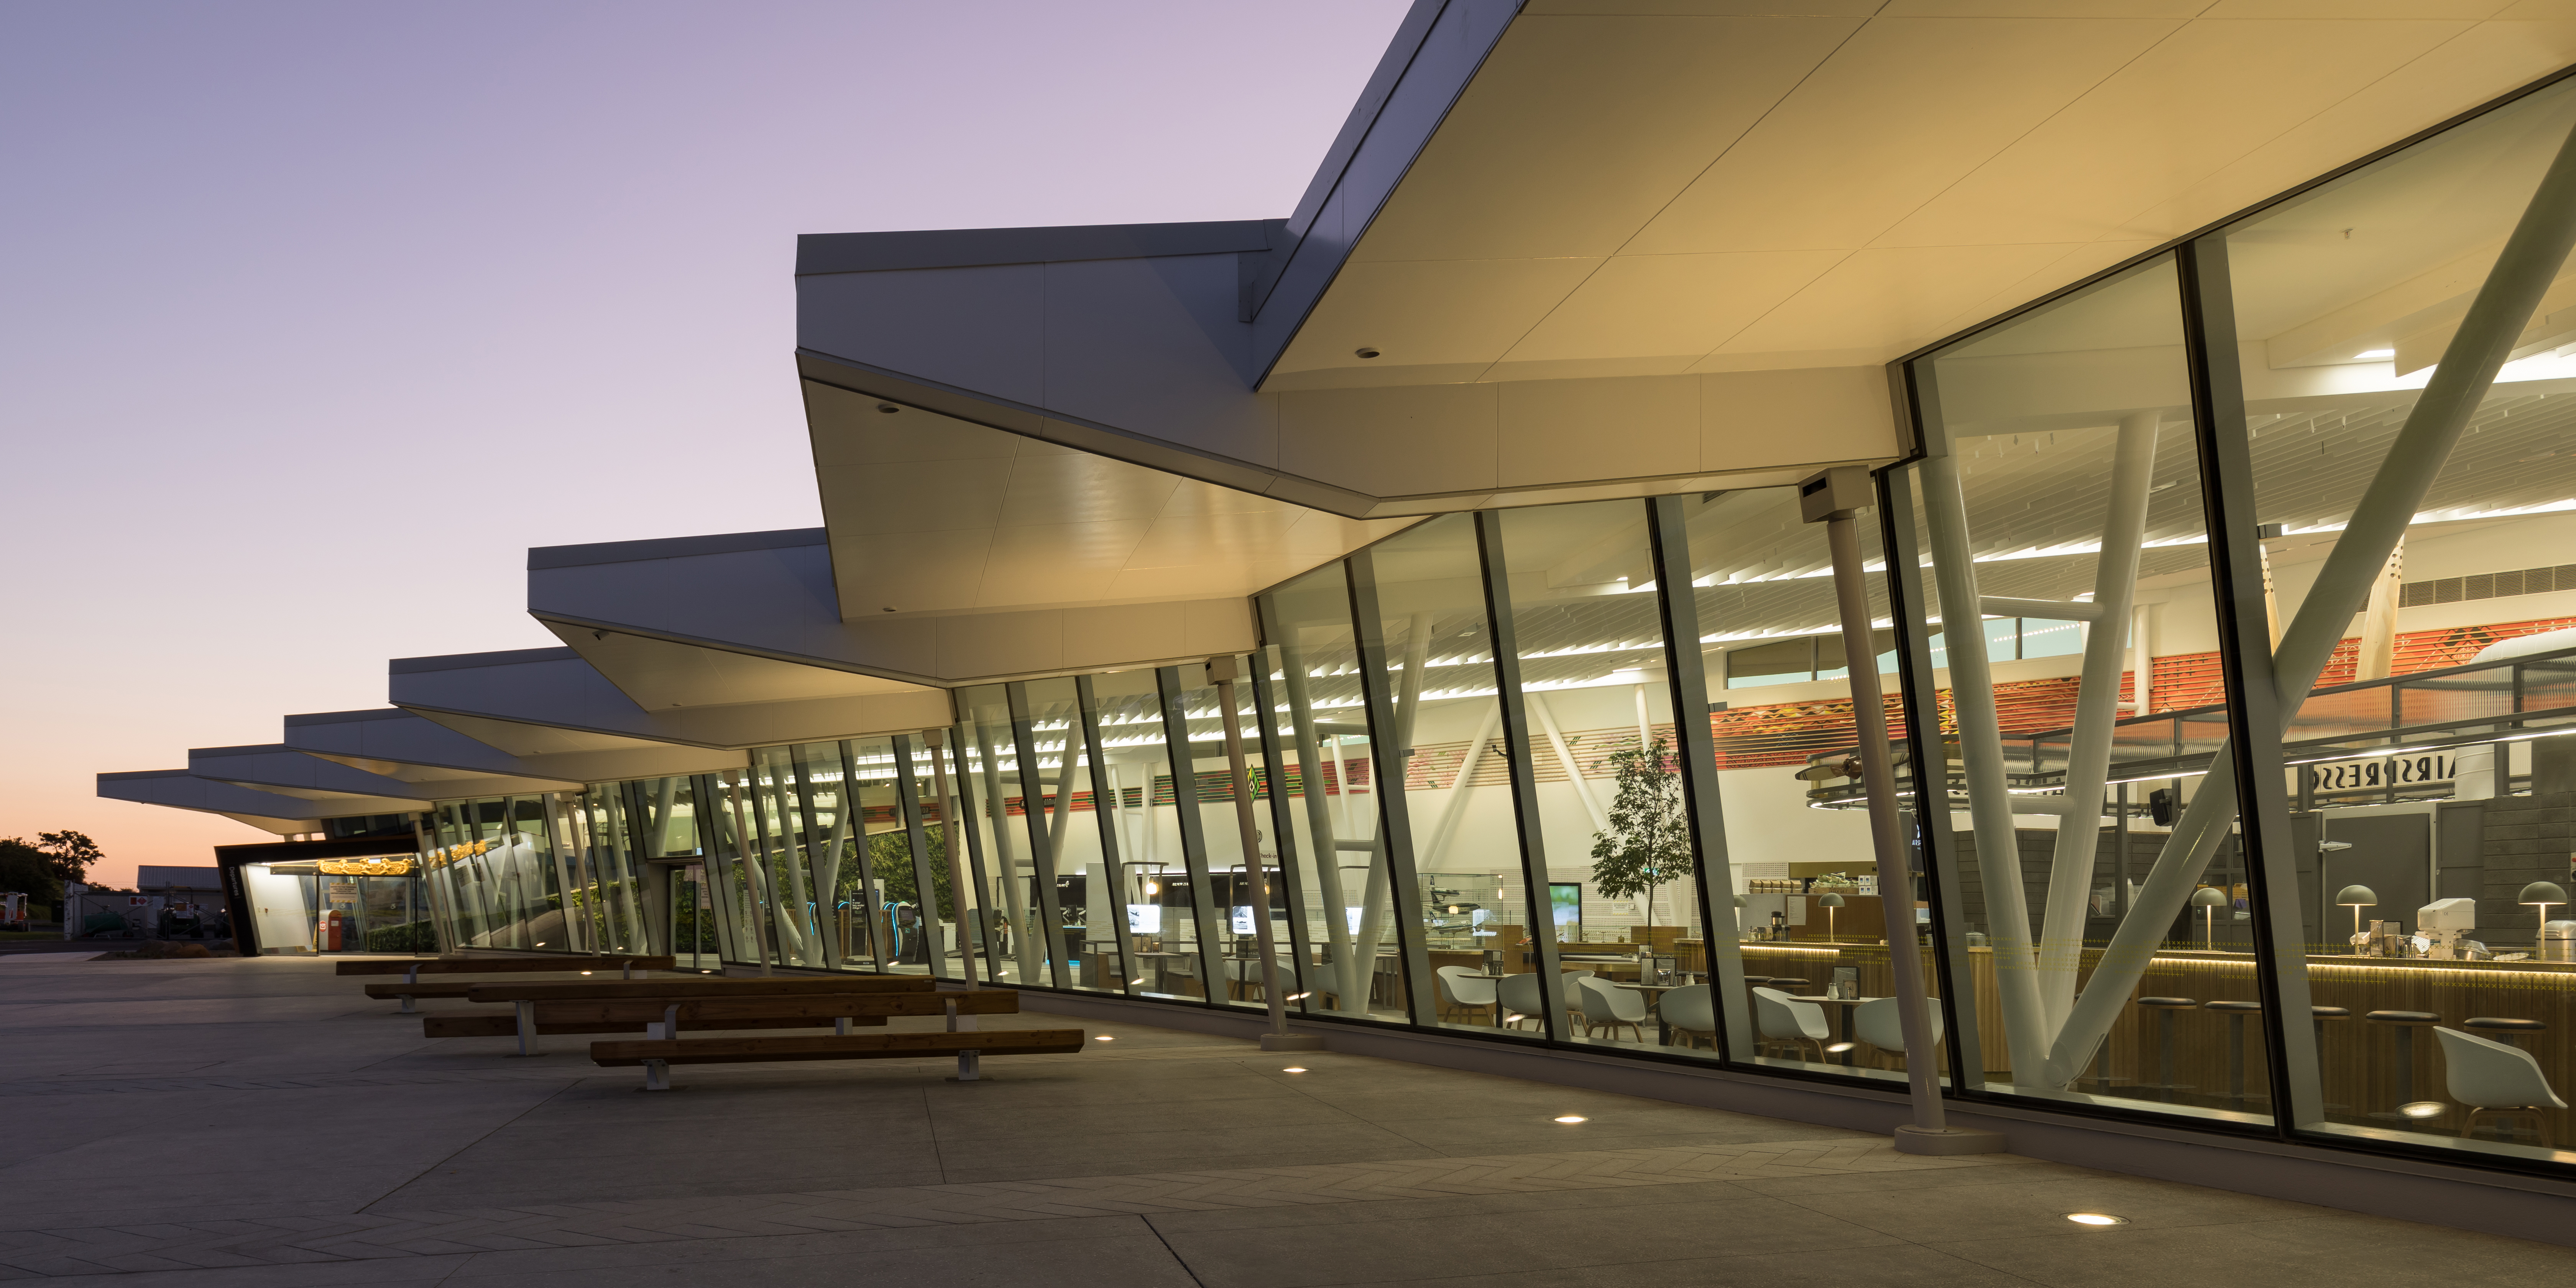 New Plymouth Airport terminal finalist for Prix Versailles architecture award